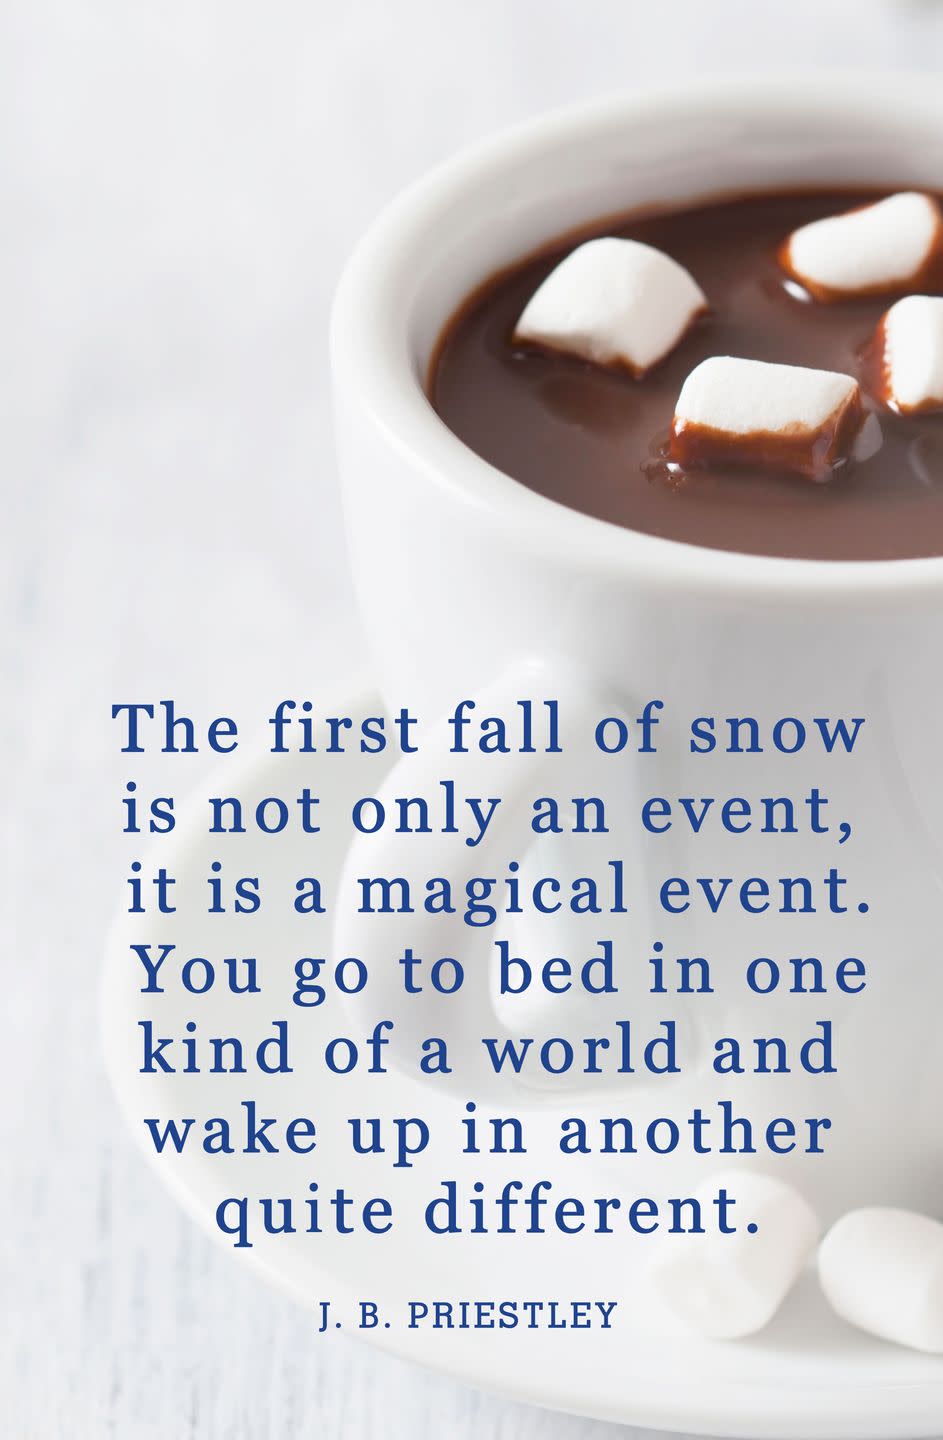 <p>"The first fall of snow is not only an event, it is a magical event. You go to bed in one kind of a world and wake up in another quite different."</p>